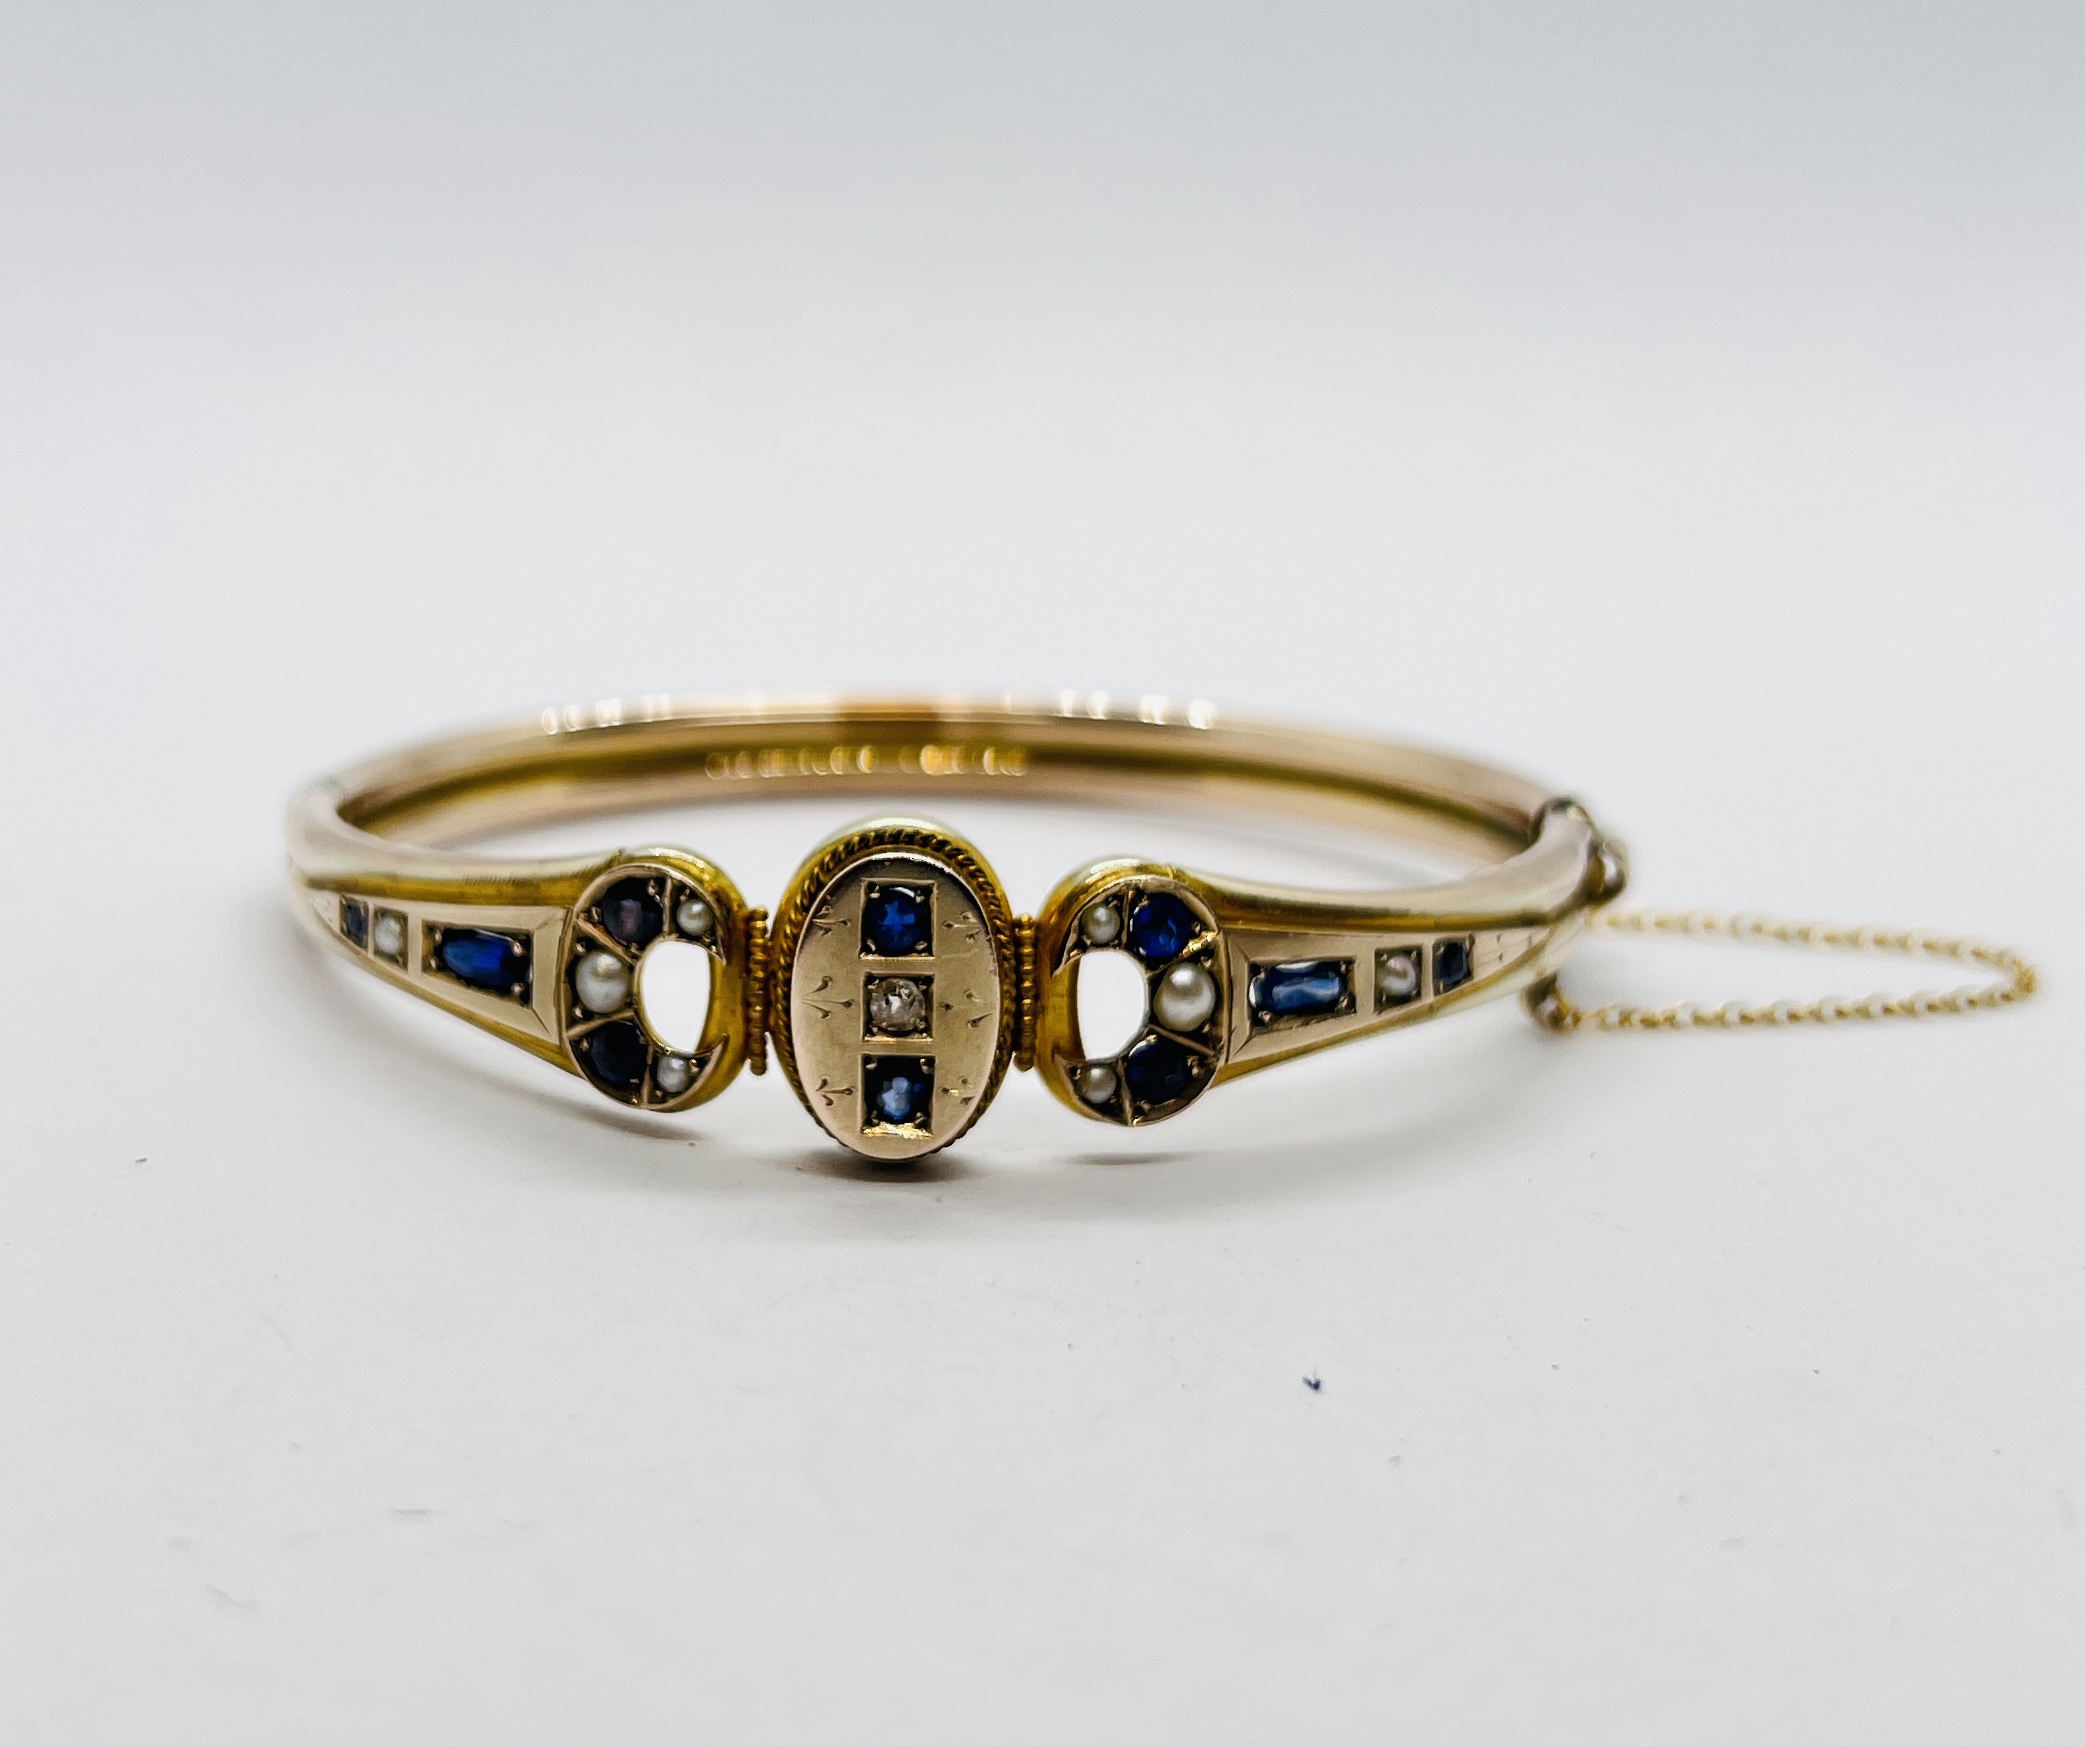 AN IMPRESSIVE EDWARDIAN HINGED YELLOW METAL BANGLE AND SAFETY CHAIN INSET WITH A DIAMOND,